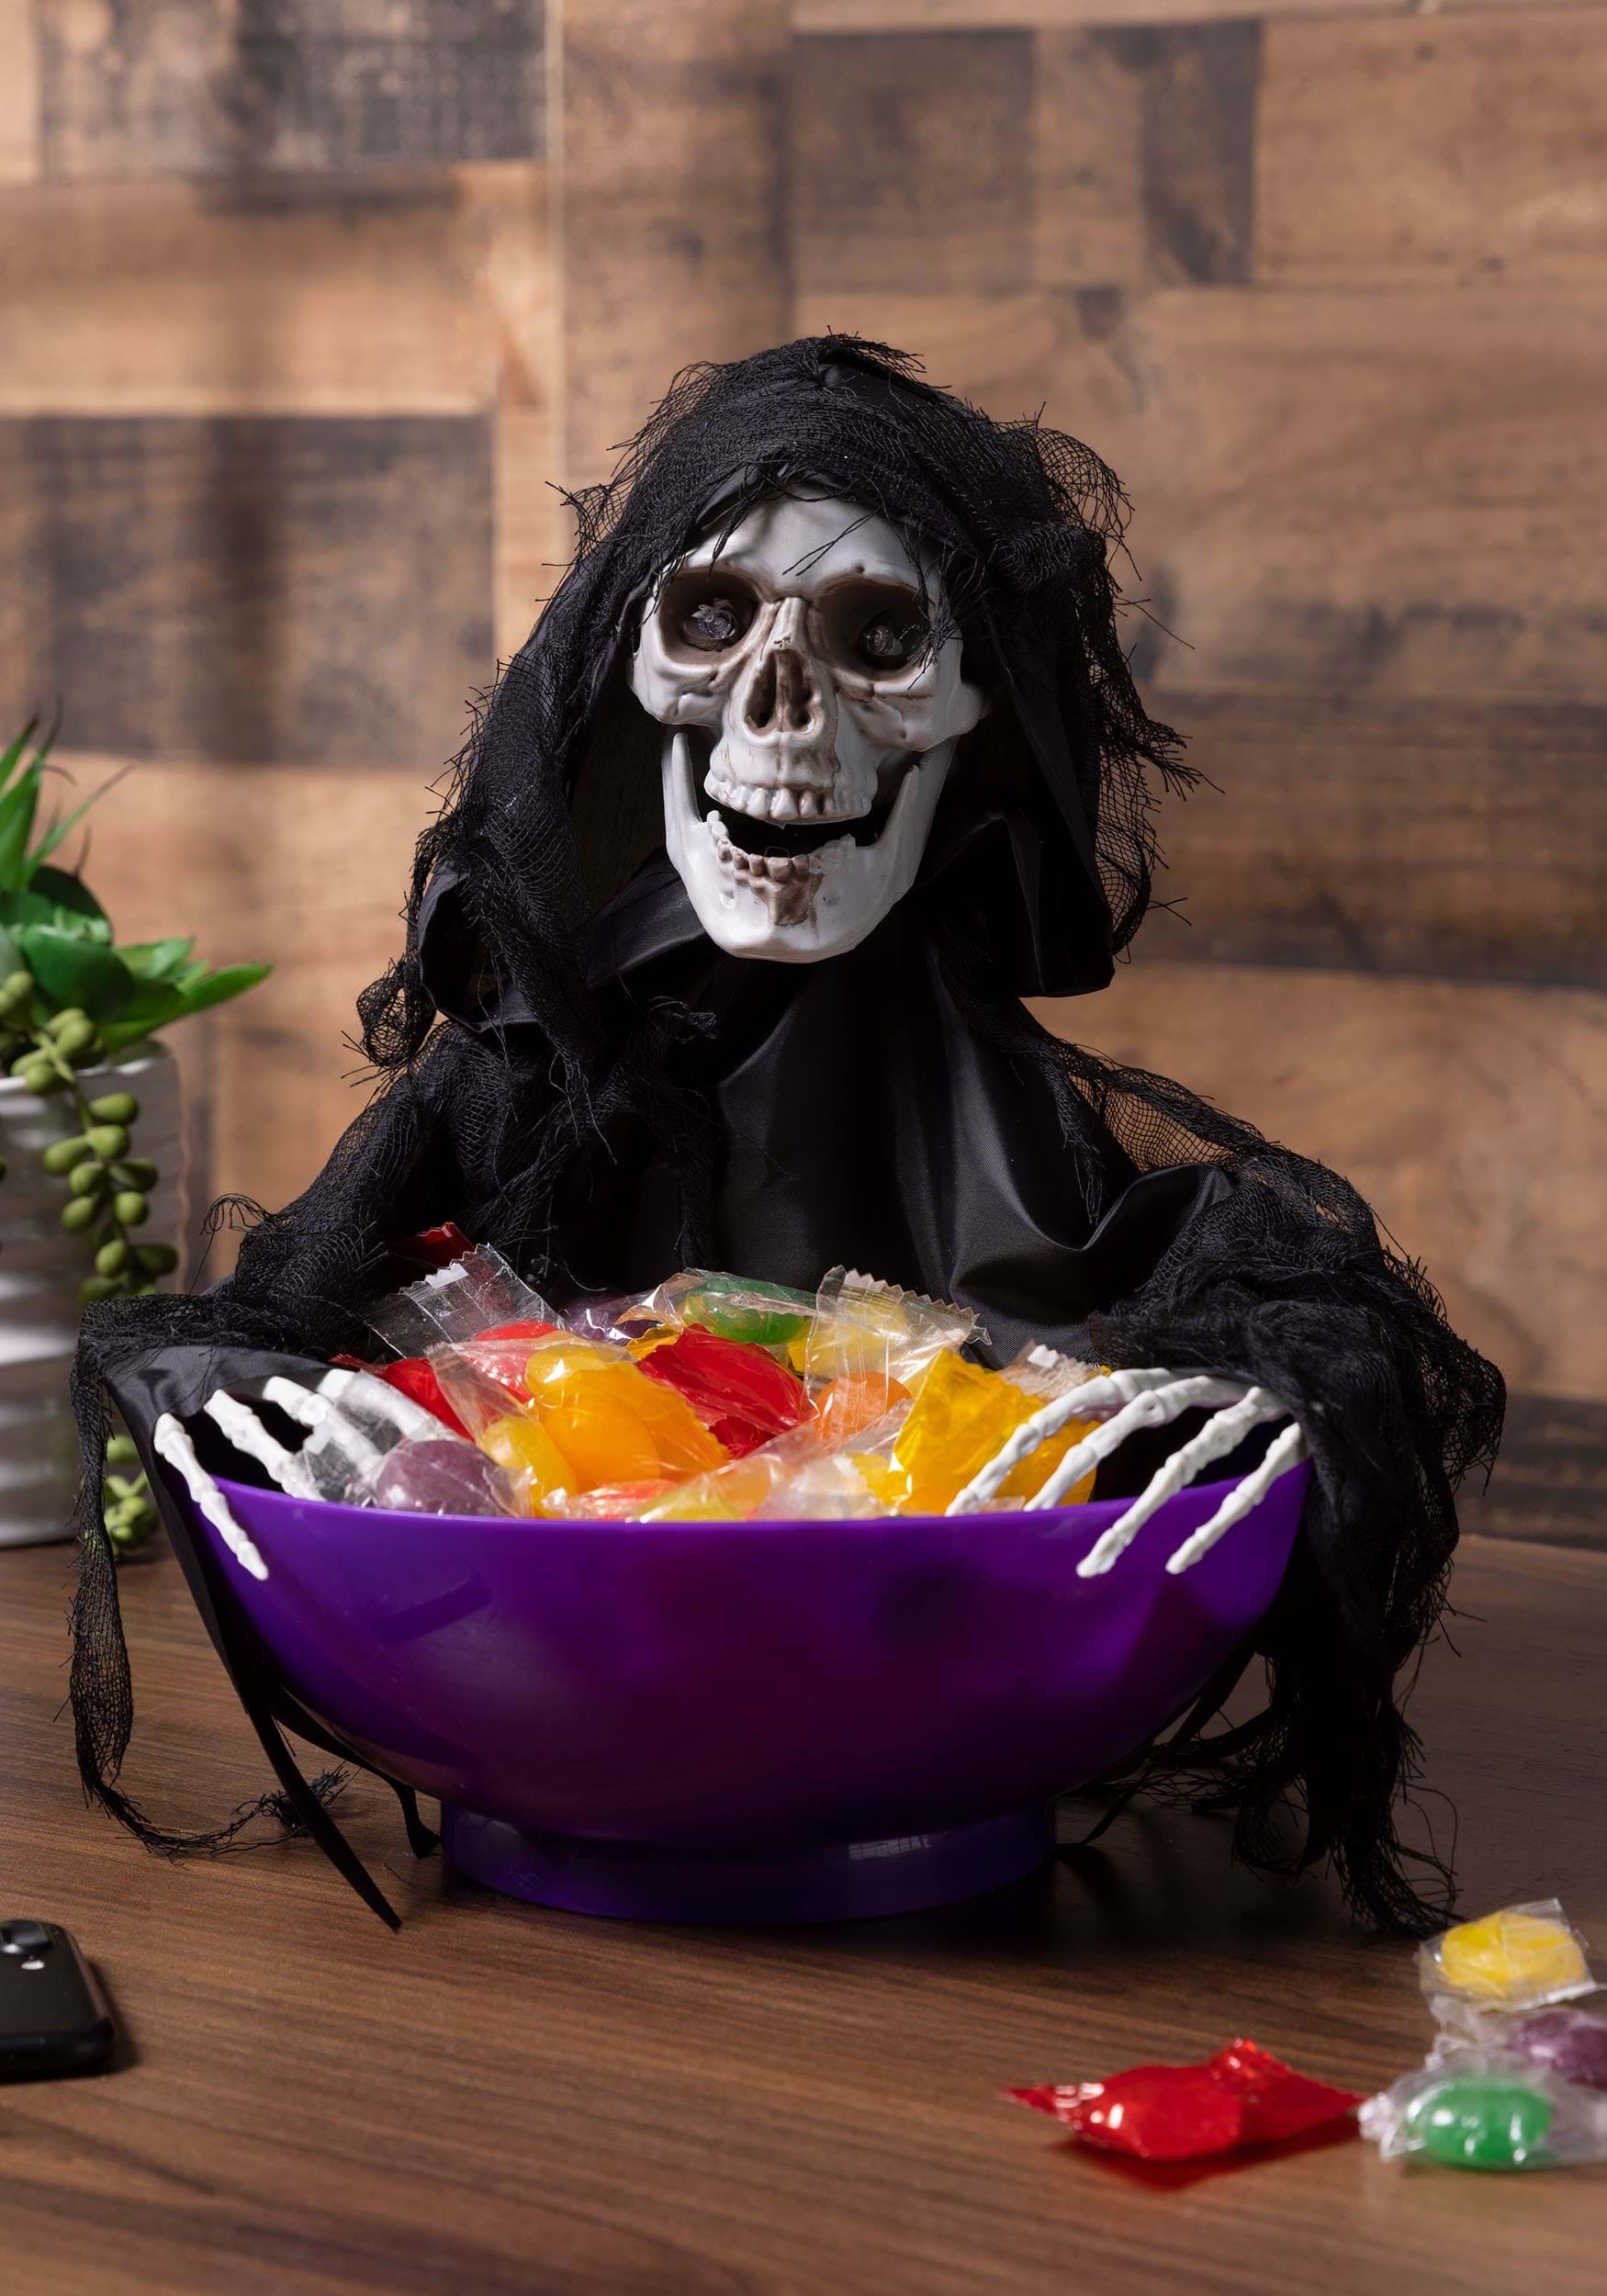 Animated Candy Bowl With Shaking Reaper Halloween Decoration.